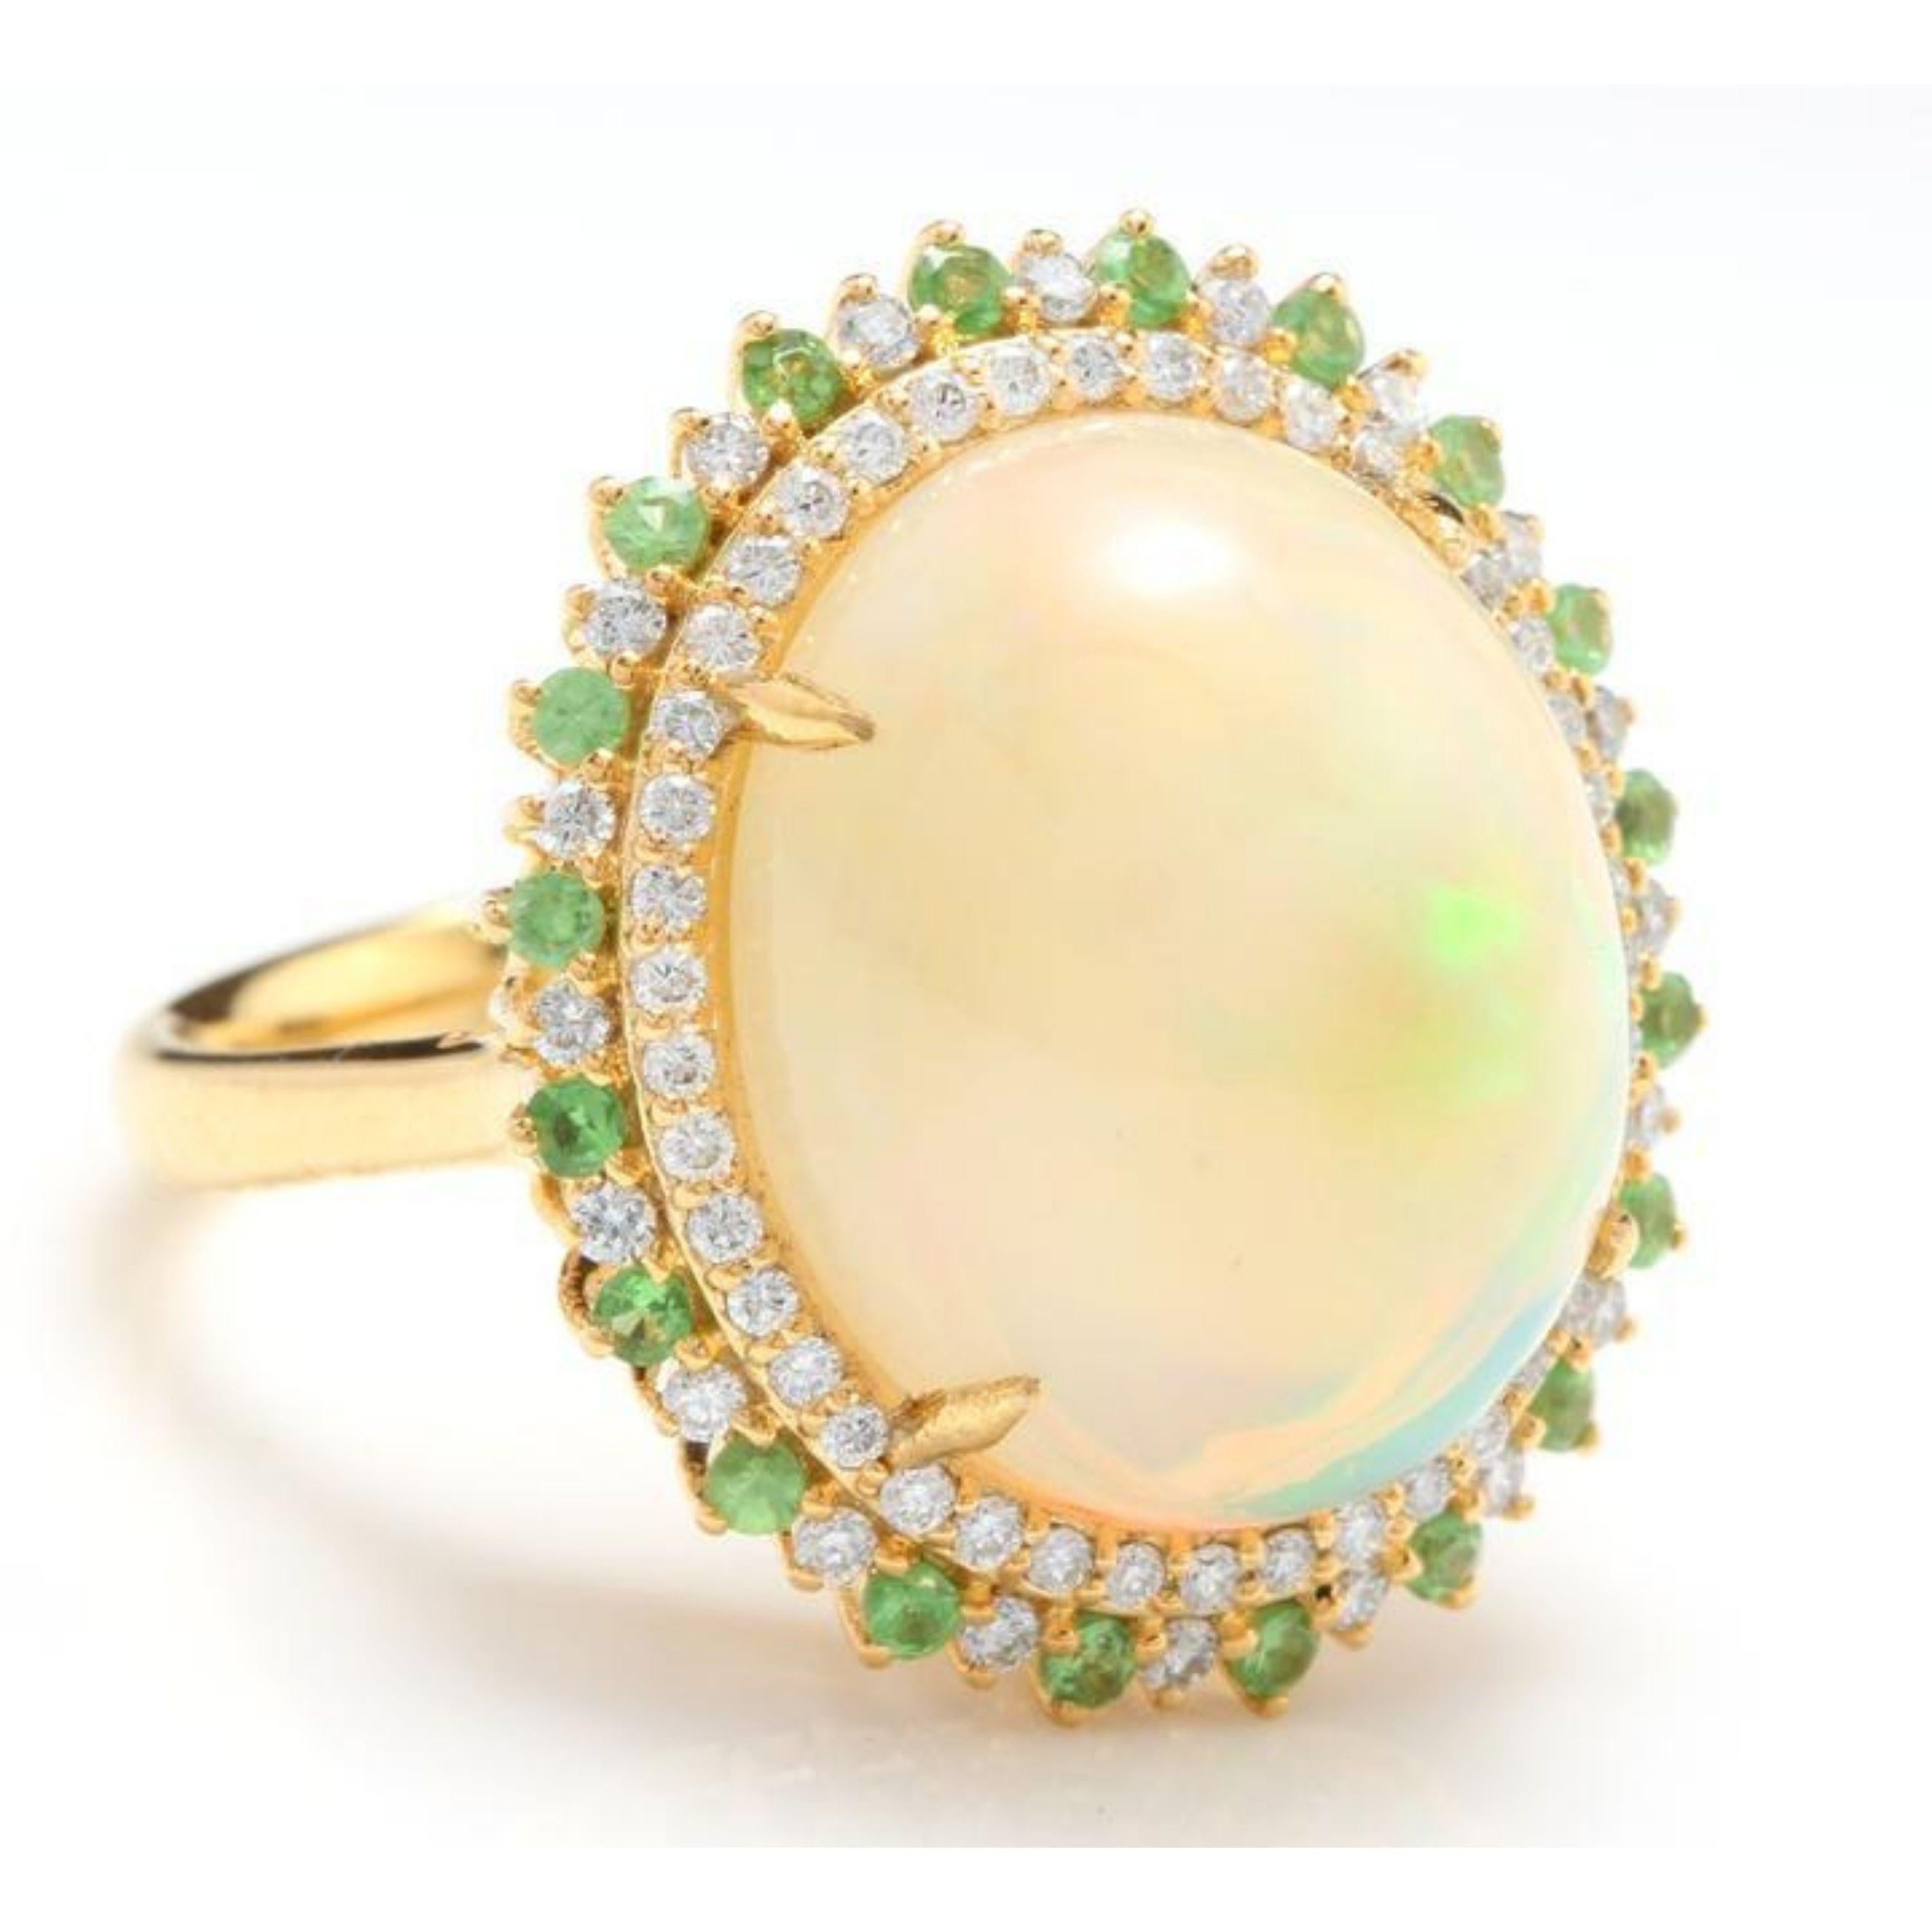 8.55 Carats Natural Impressive Ethiopian Opal, Tsavorite and Diamond 14K Solid Yellow Gold Ring

The opal has beautiful fire, pictures don't show the whole beauty of the opal!

Total Natural Opal Weight is: Approx. 8.15 Carats

Opal Measures: